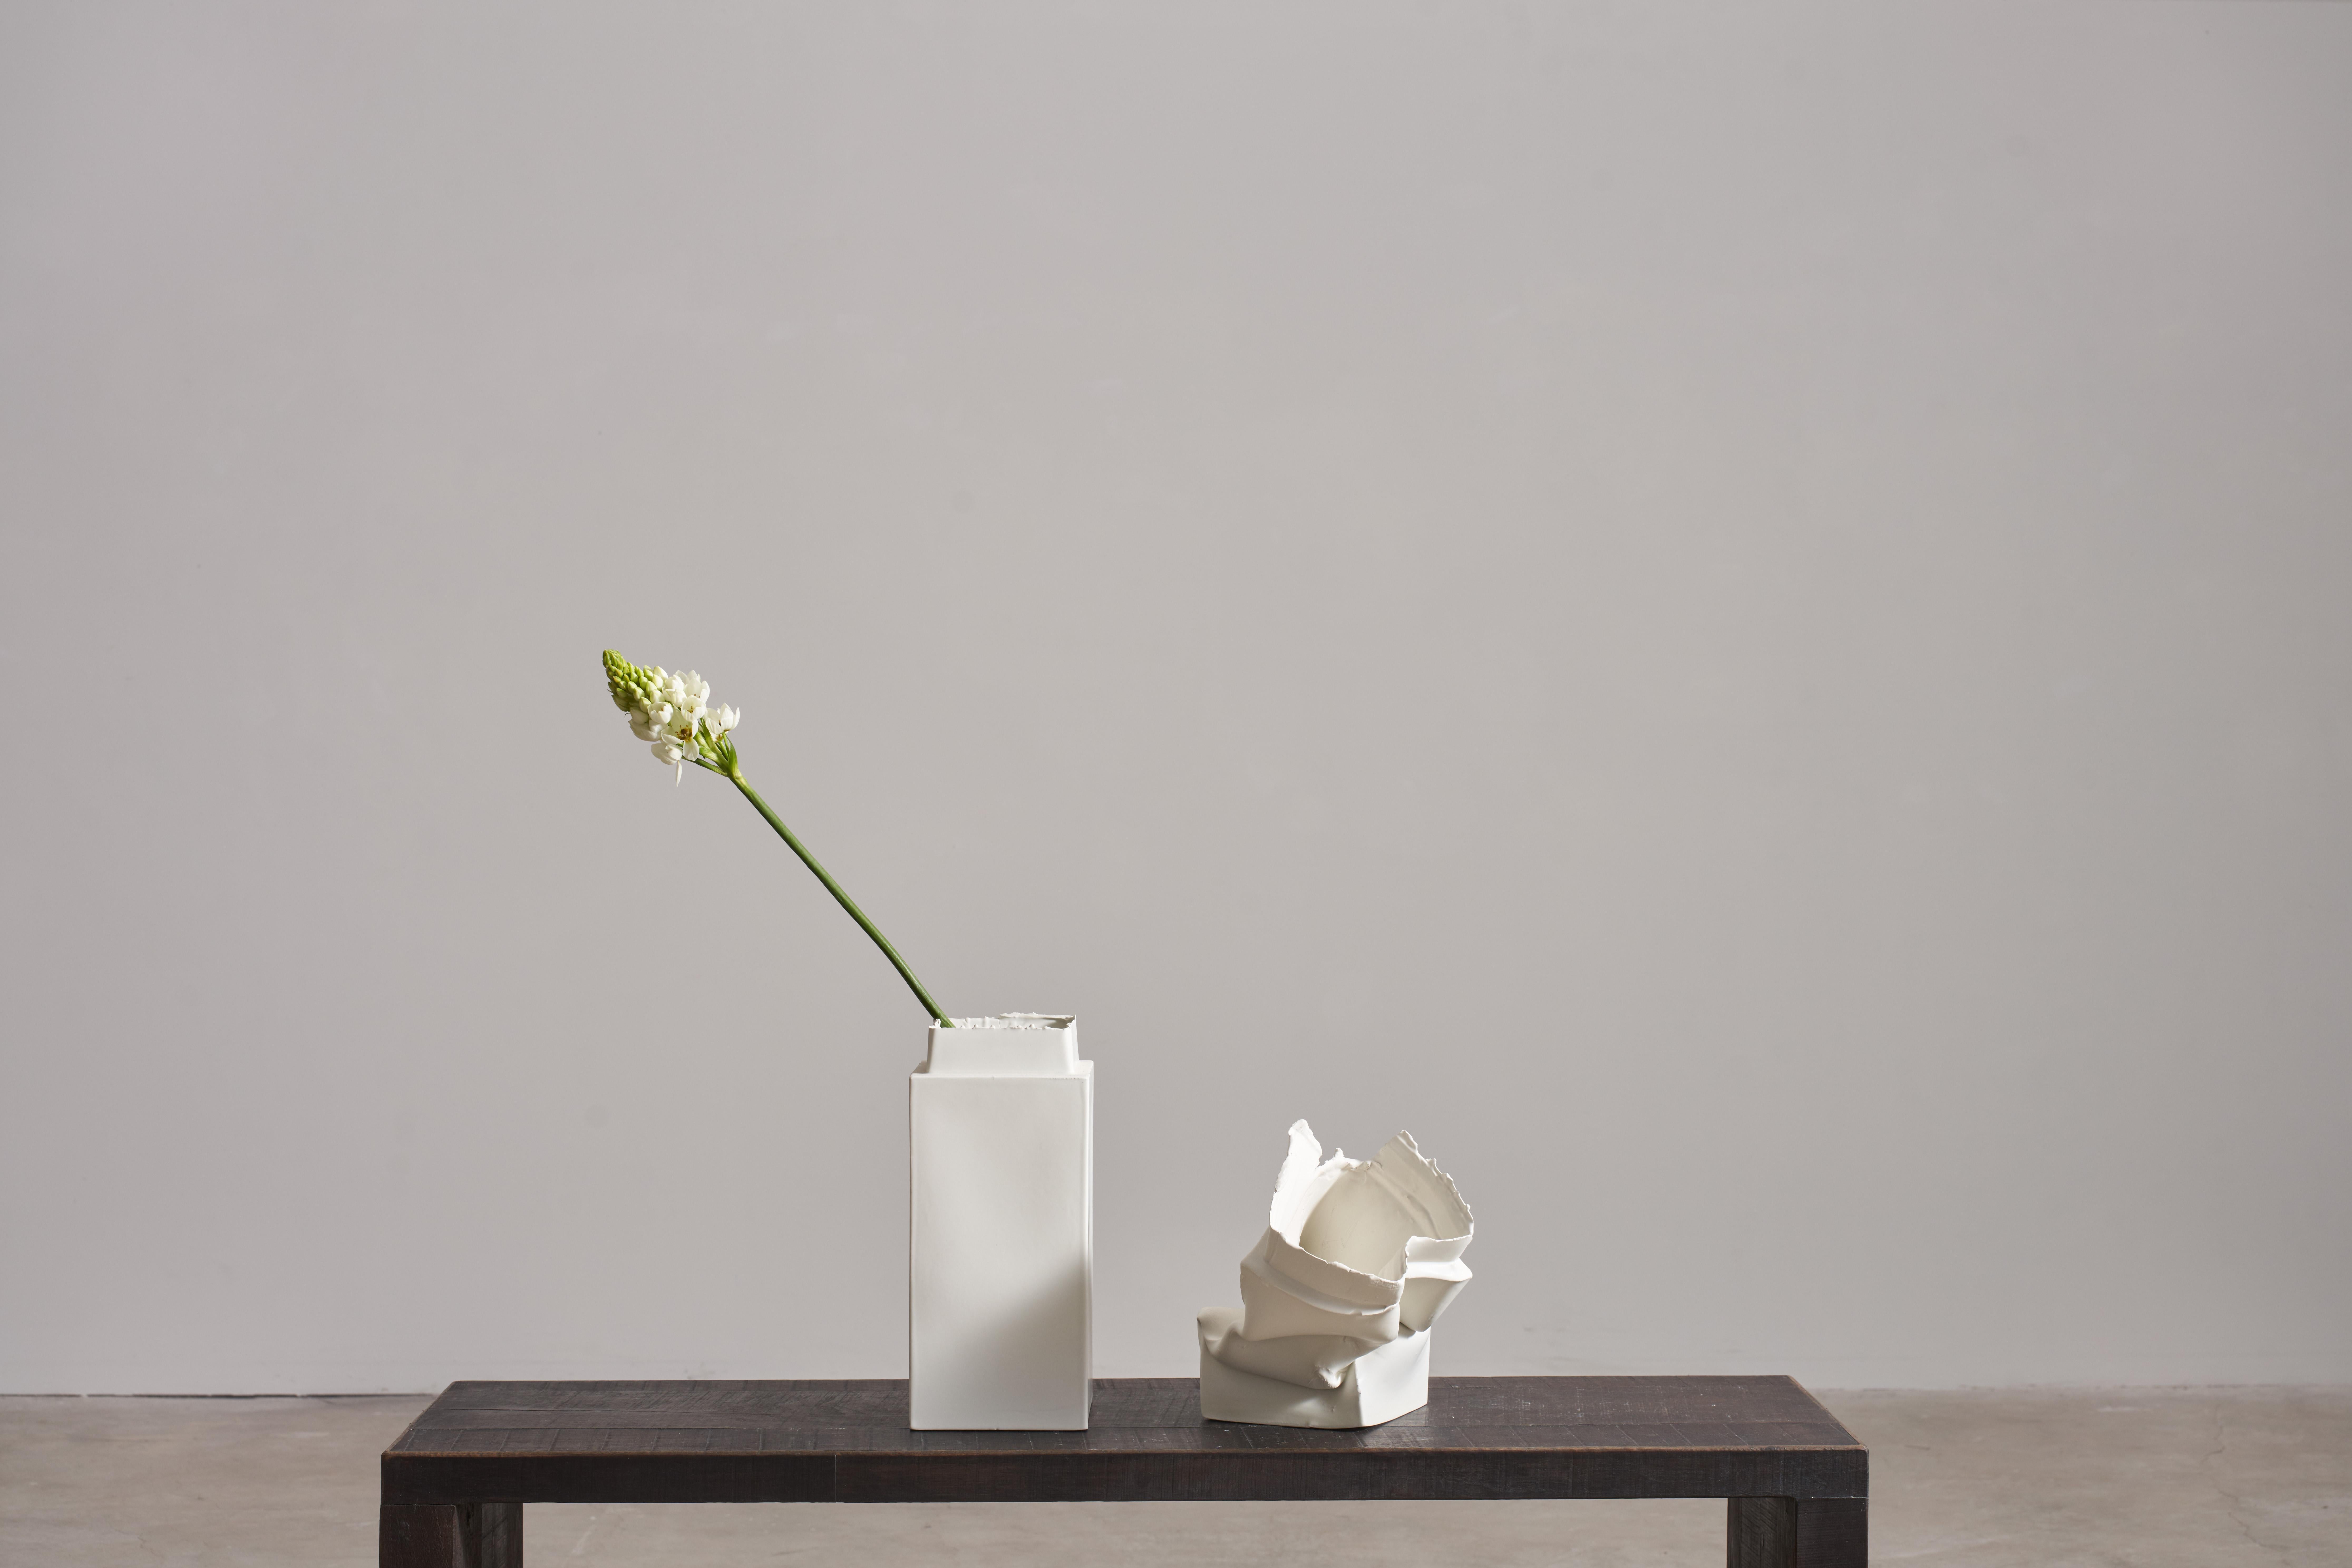 The Brenta vases is part of a project entitled Break the Mold by artist Jenna Basso Pietrobon. Each vase is unique, you will receive one straight and one collapsed. The standard glaze uses an off-white semi matte and other glaze colors upon